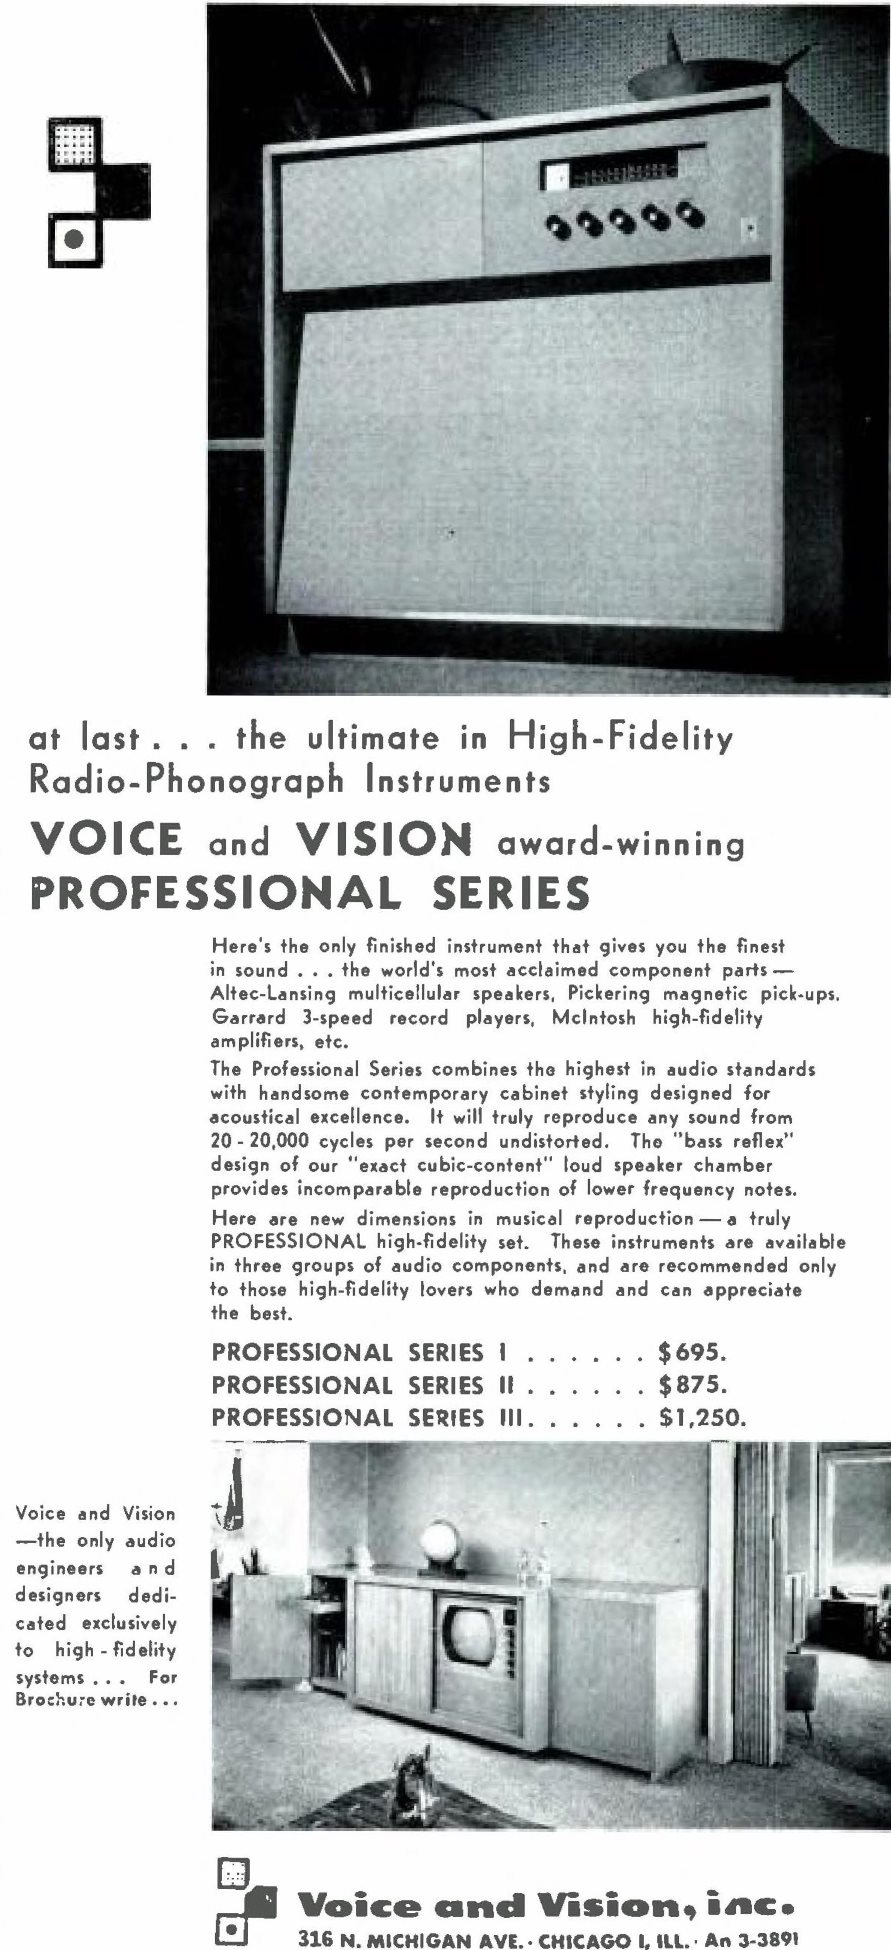 Voice and Vision 1951 129.jpg